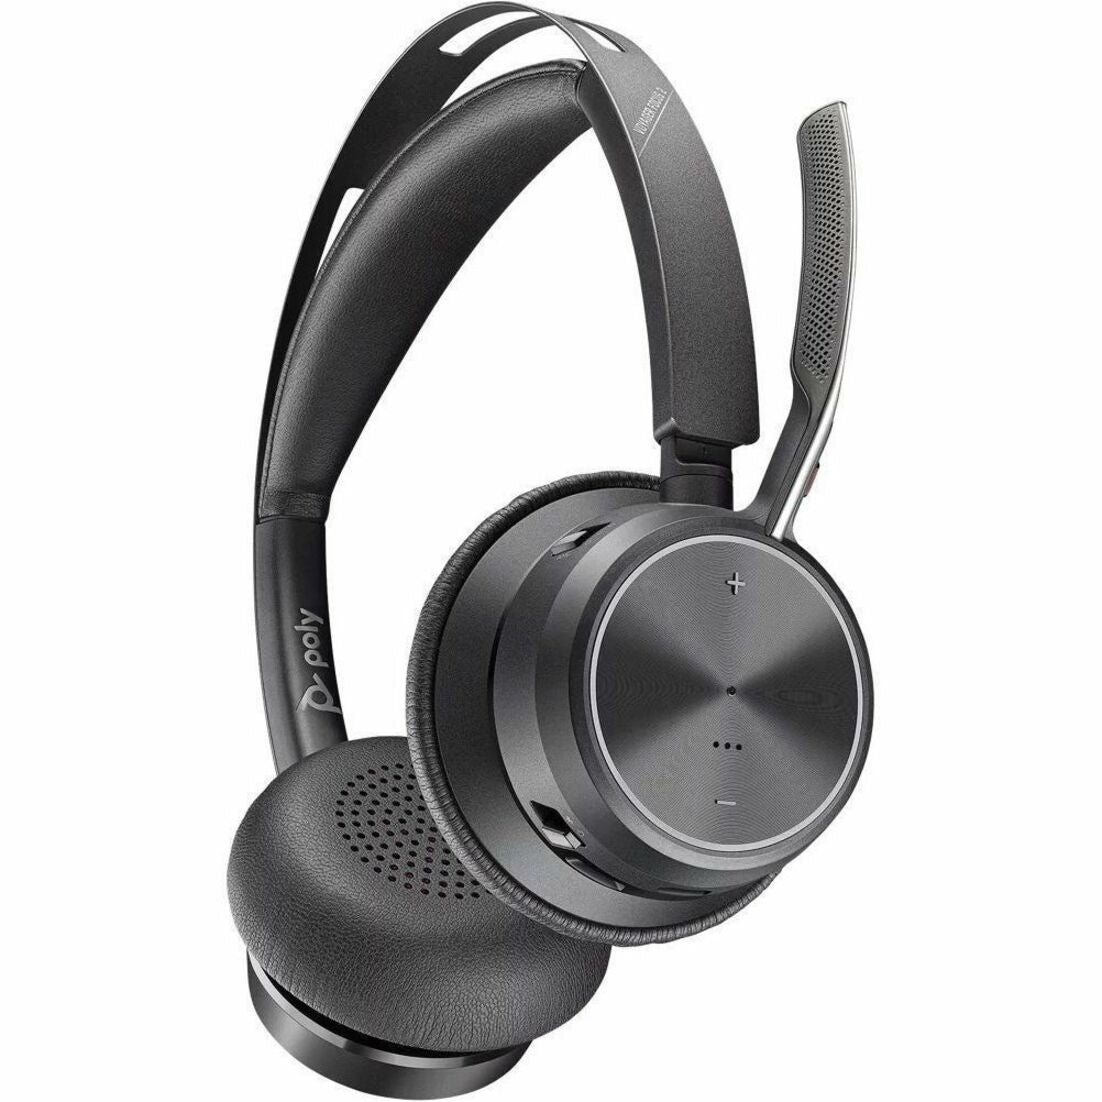 Poly 213726-02 Voyager Focus 2 Headset, Wireless Bluetooth On-ear Headphones with Noise Cancelling, Rotating Microphone, and Rechargeable Battery